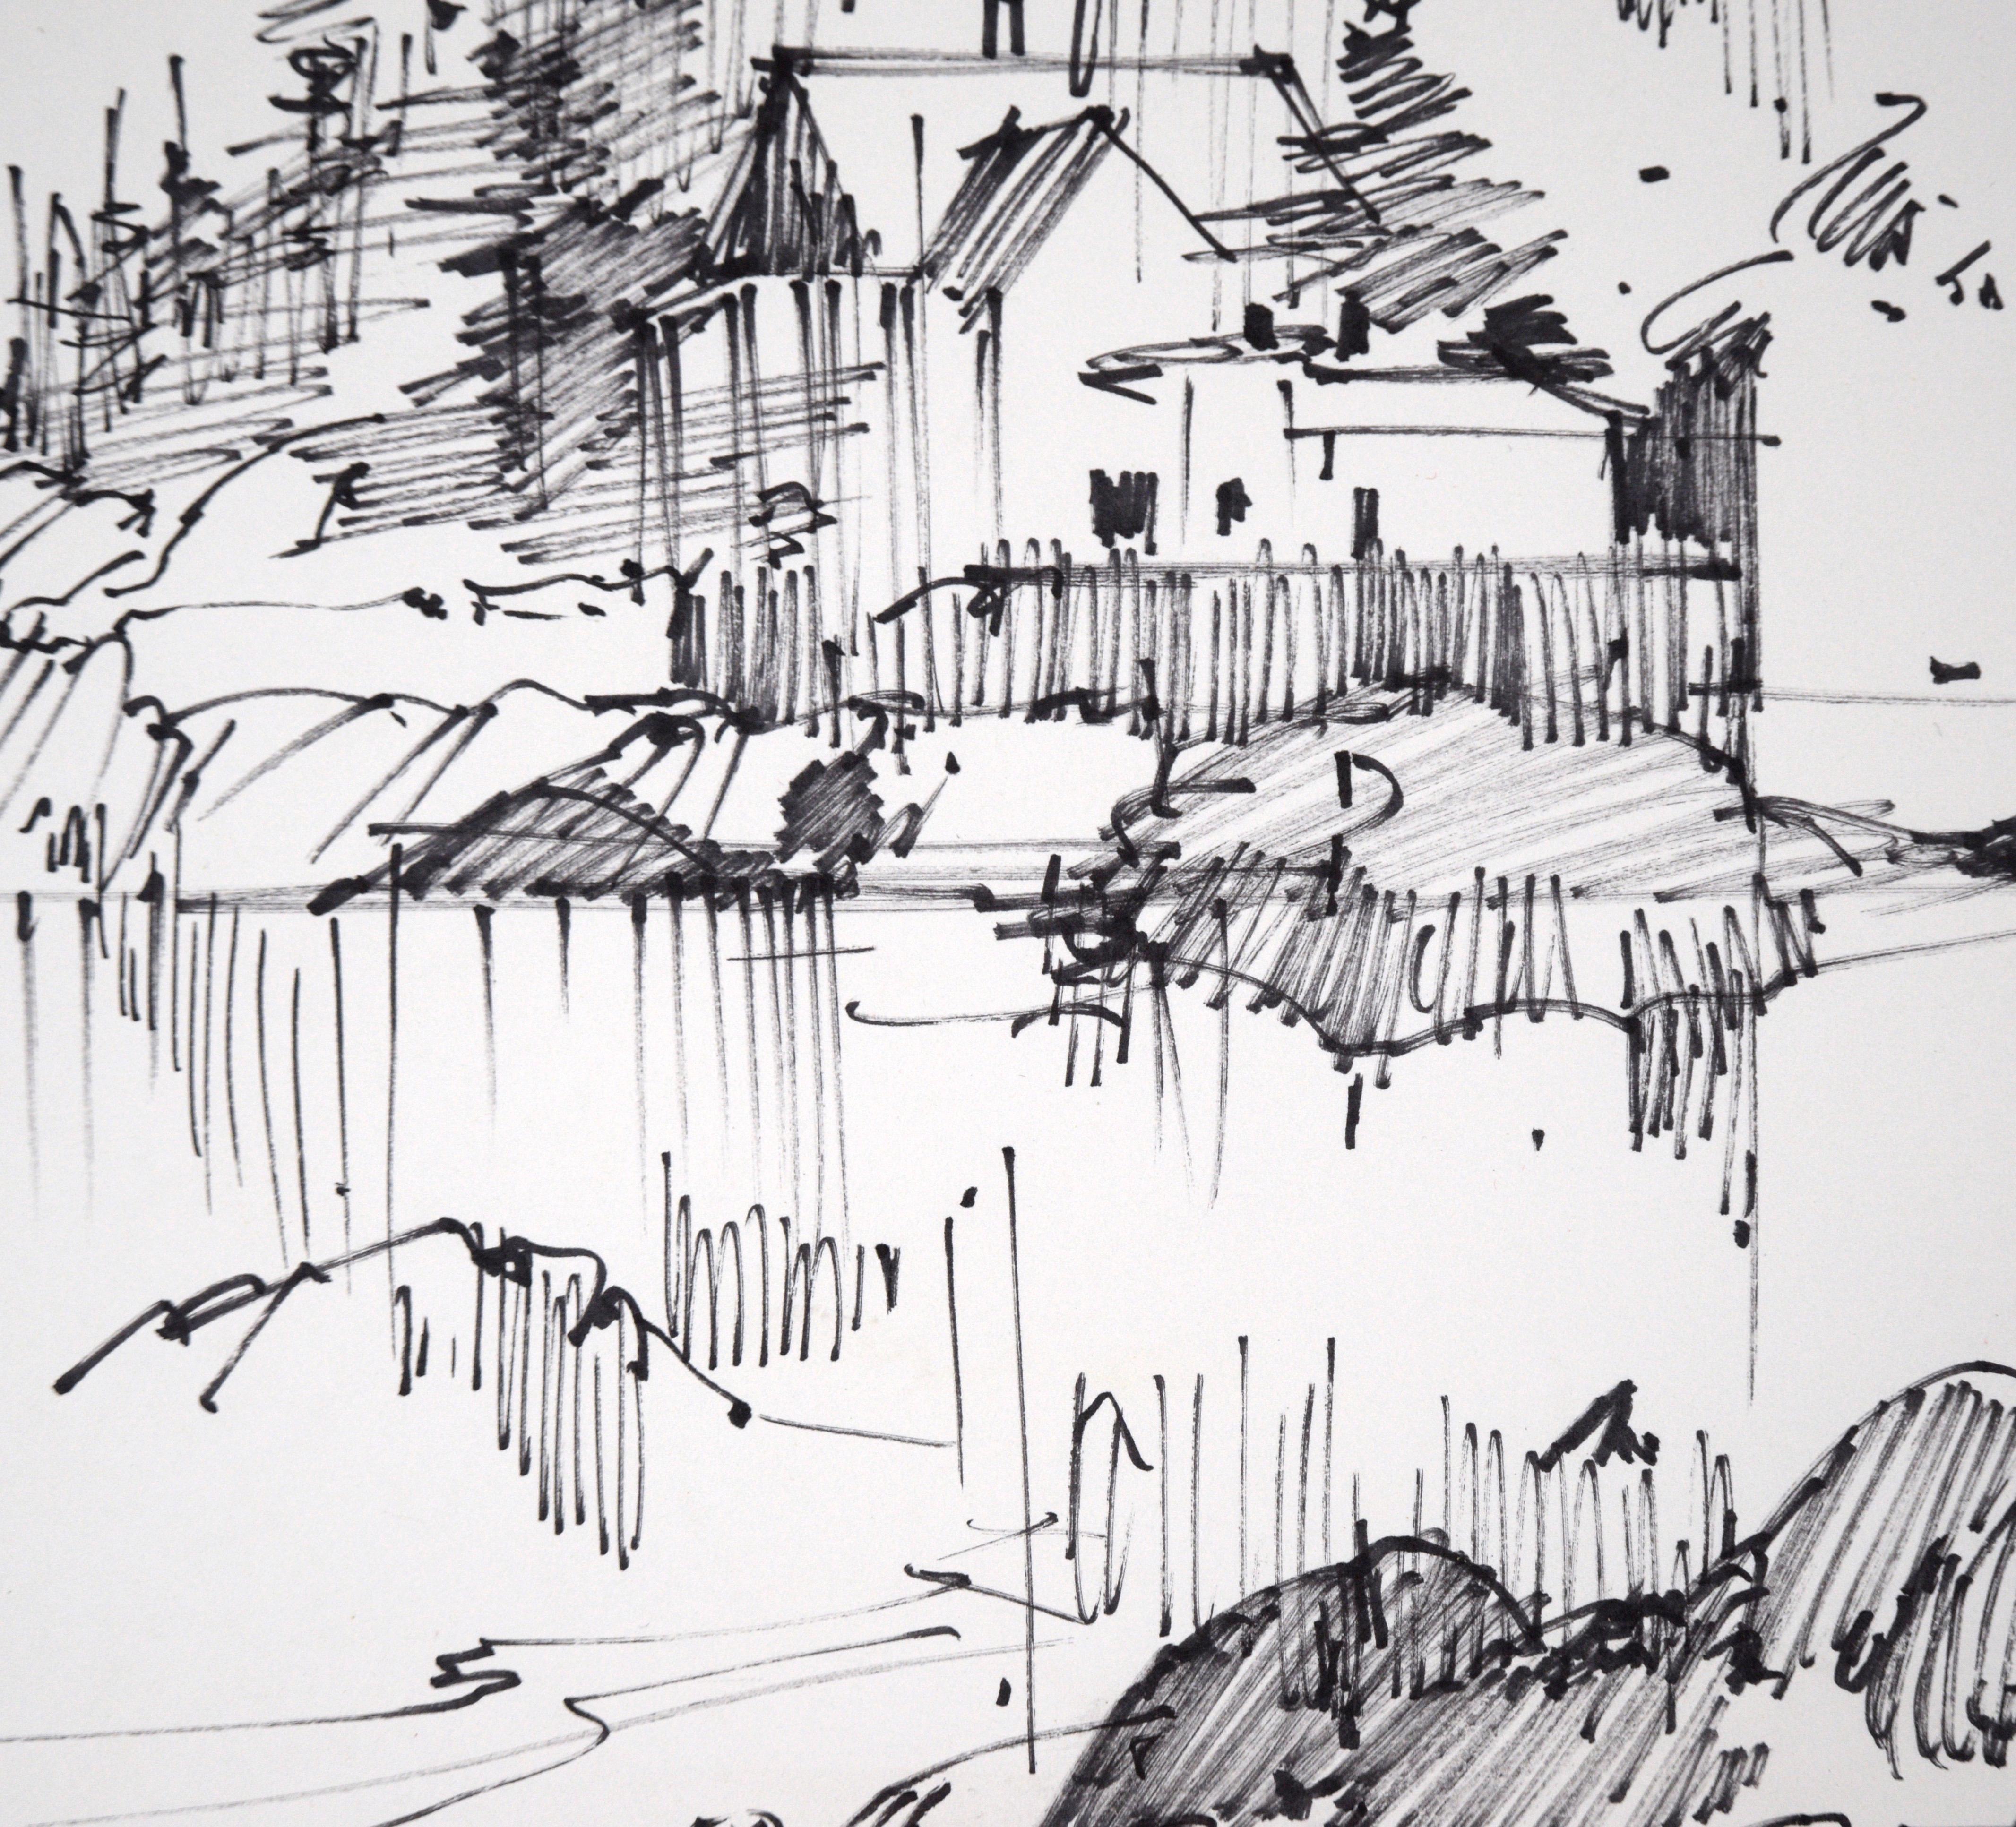 House Across the Lake - Line Drawing Landscape in Ink on Paper

Delicate landscape line drawing by listed Maine artist Laurence Sisson (American, 1928-2015). The viewer stands at the edge of a body of water, with a few rocks on the shore. Across the